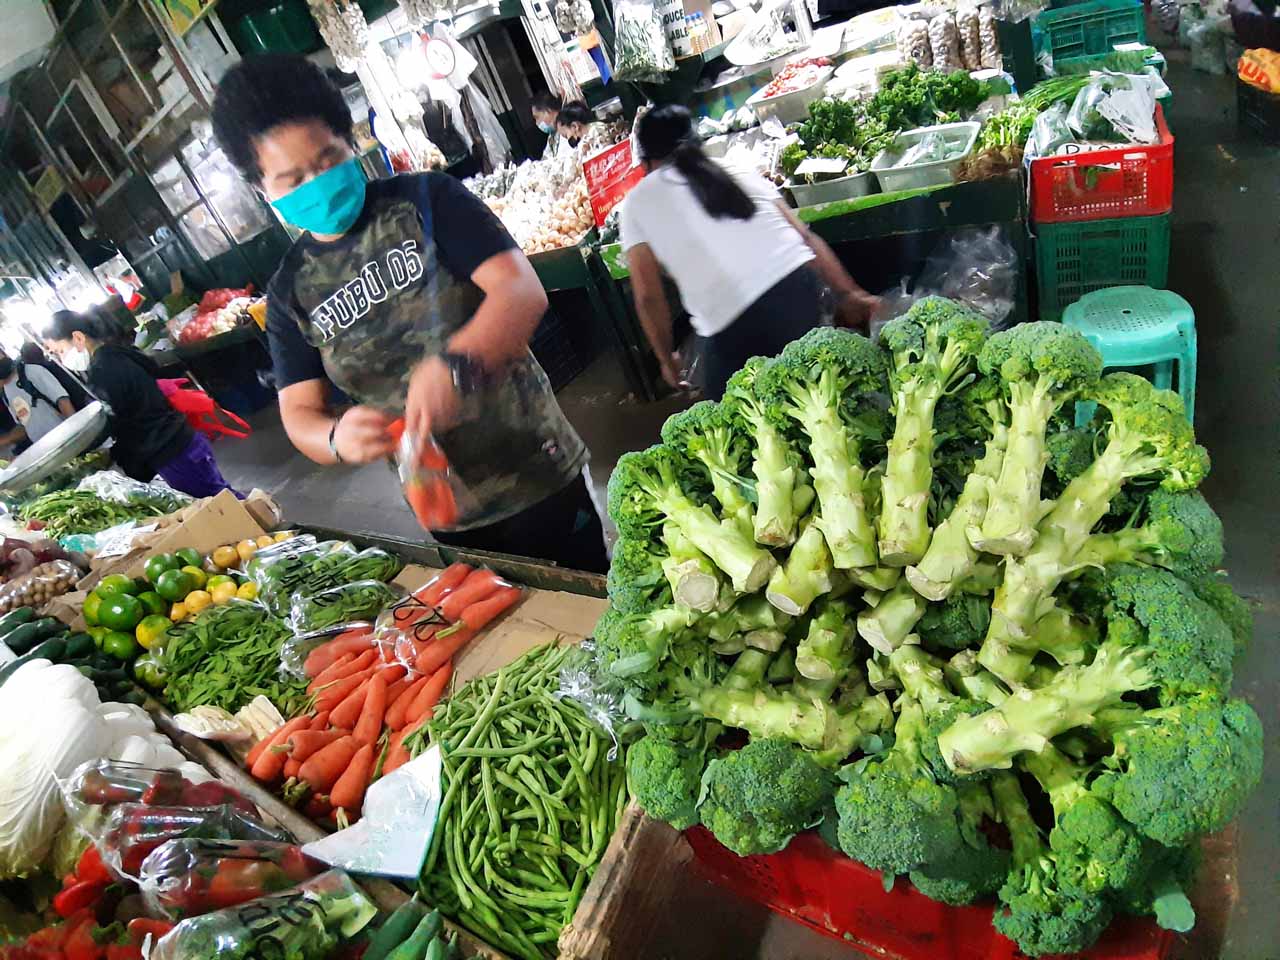 MARKET DAY. A market vendor in Baguio City sells his products during the COVID-19 crisis on May 19, 2020. Photos by Mau Victa/Rappler 